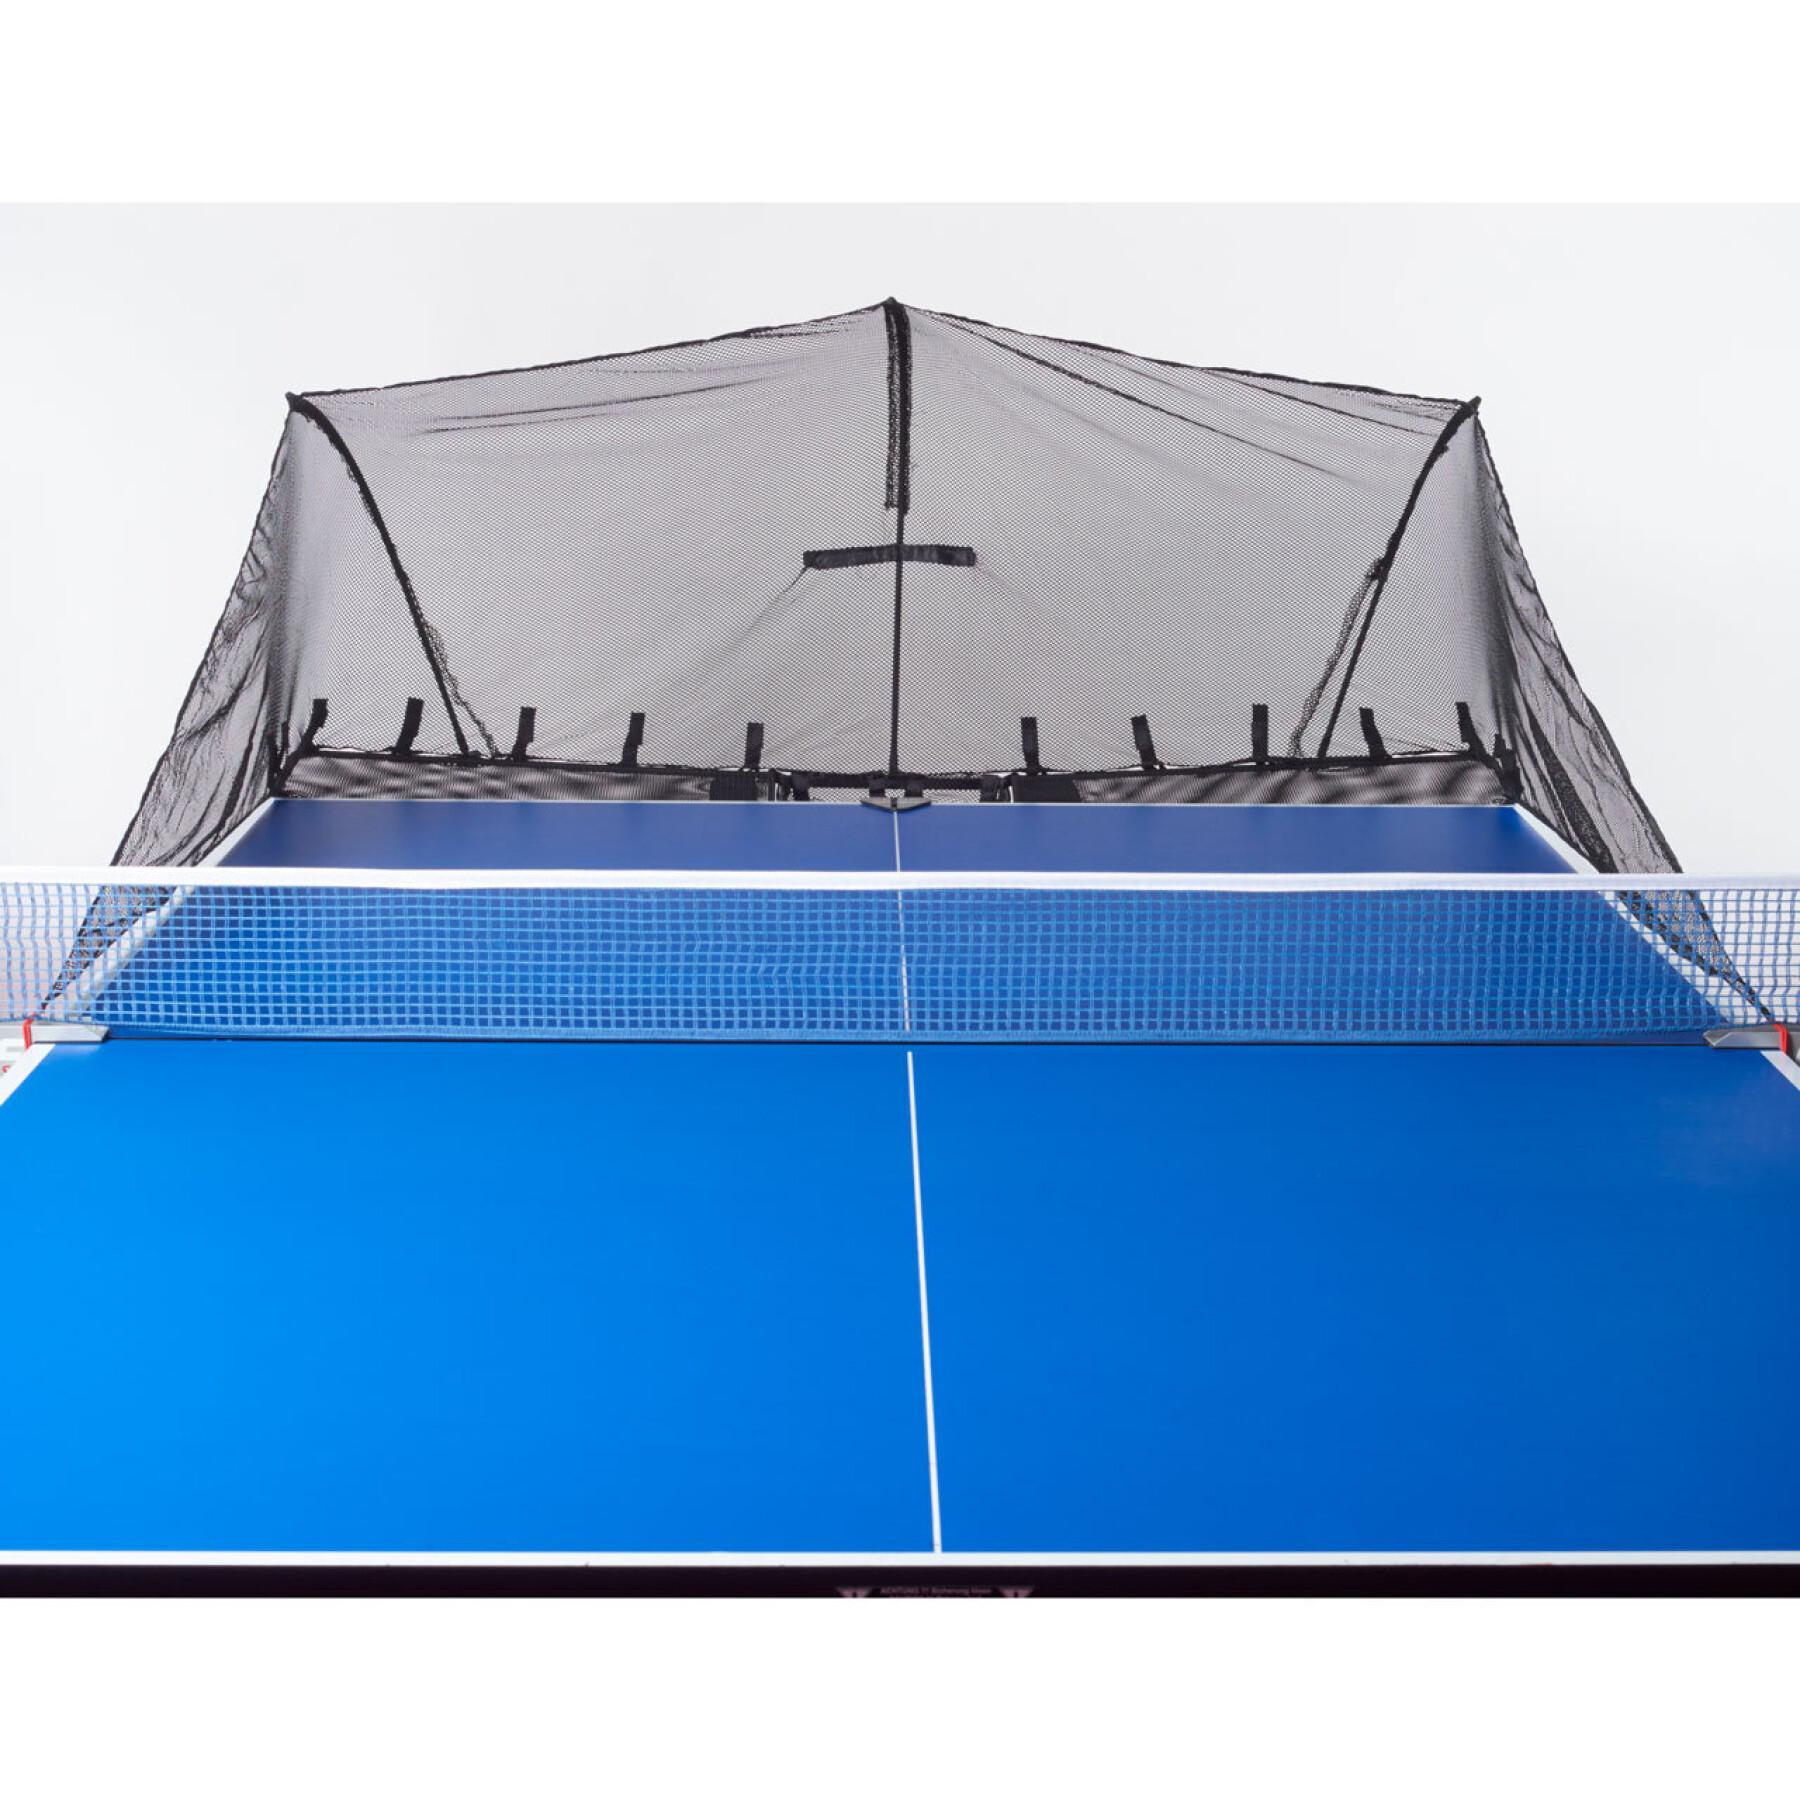 Table tennis ball recovery net Donic Newgy